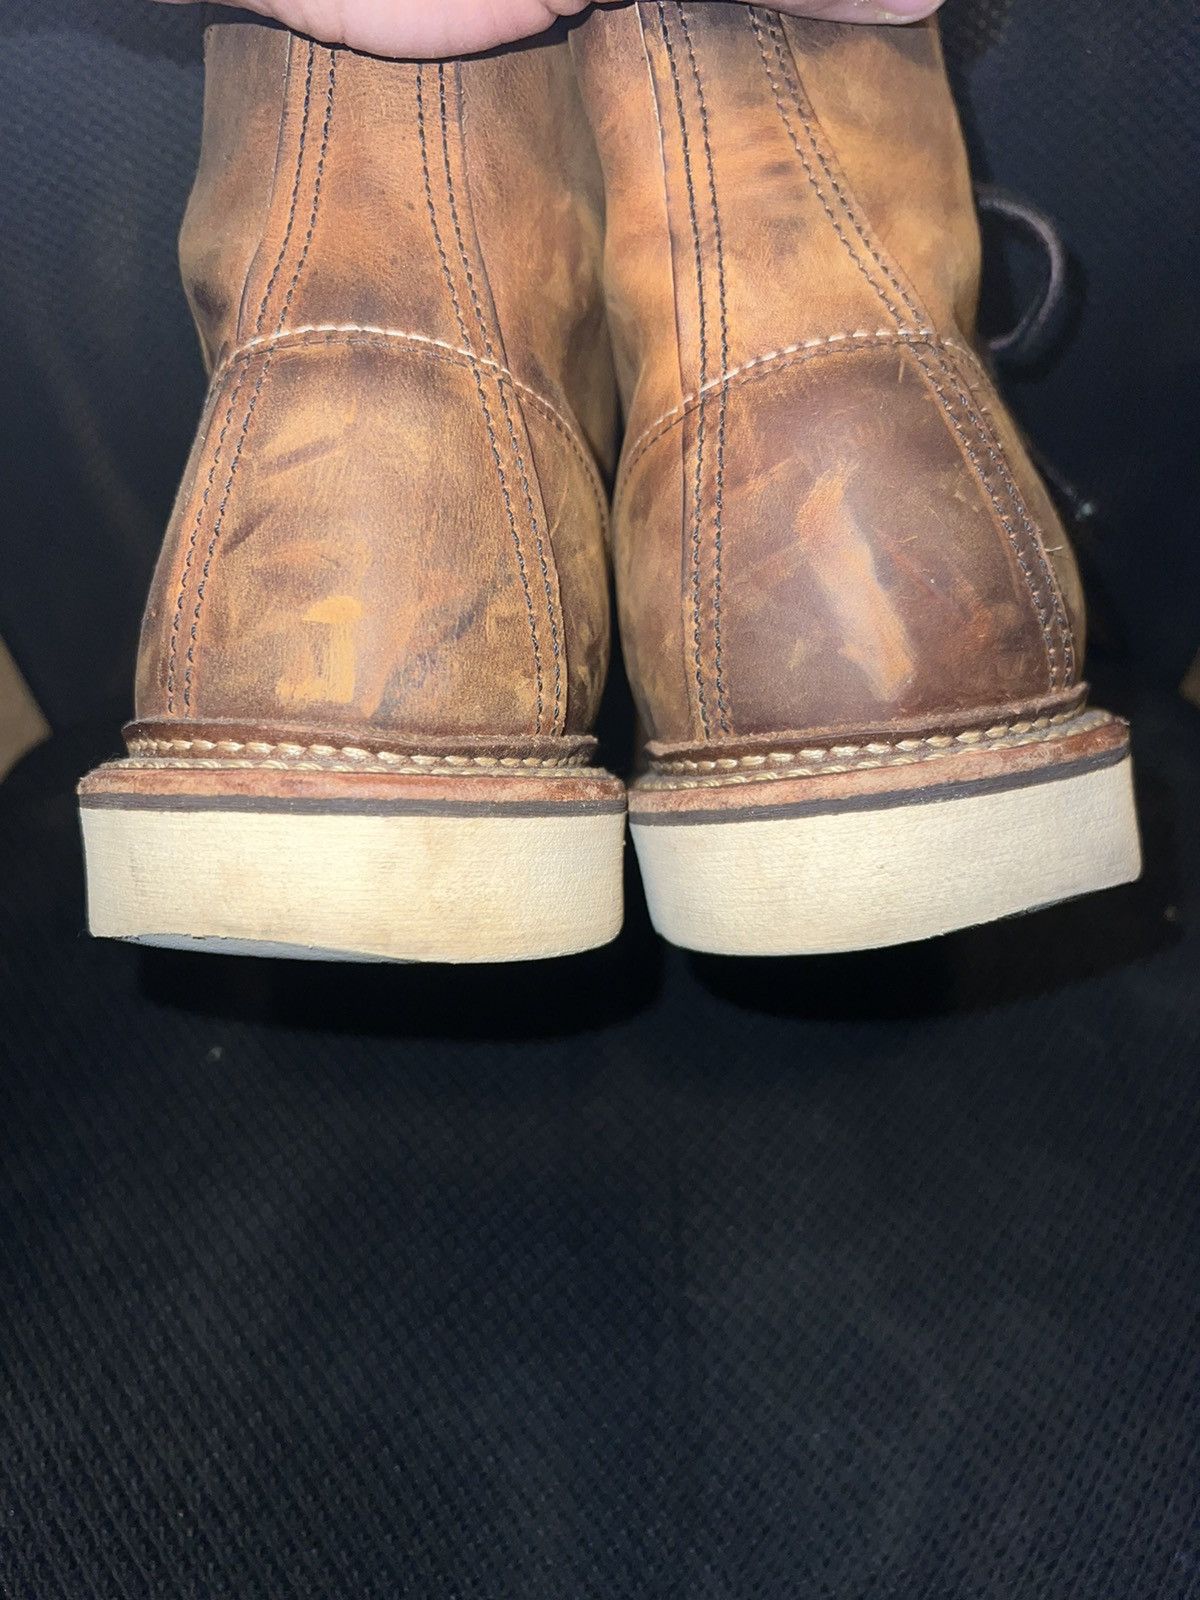 Red Wing Red Wing 1907 size 9 Size US 9 / EU 42 - 6 Thumbnail